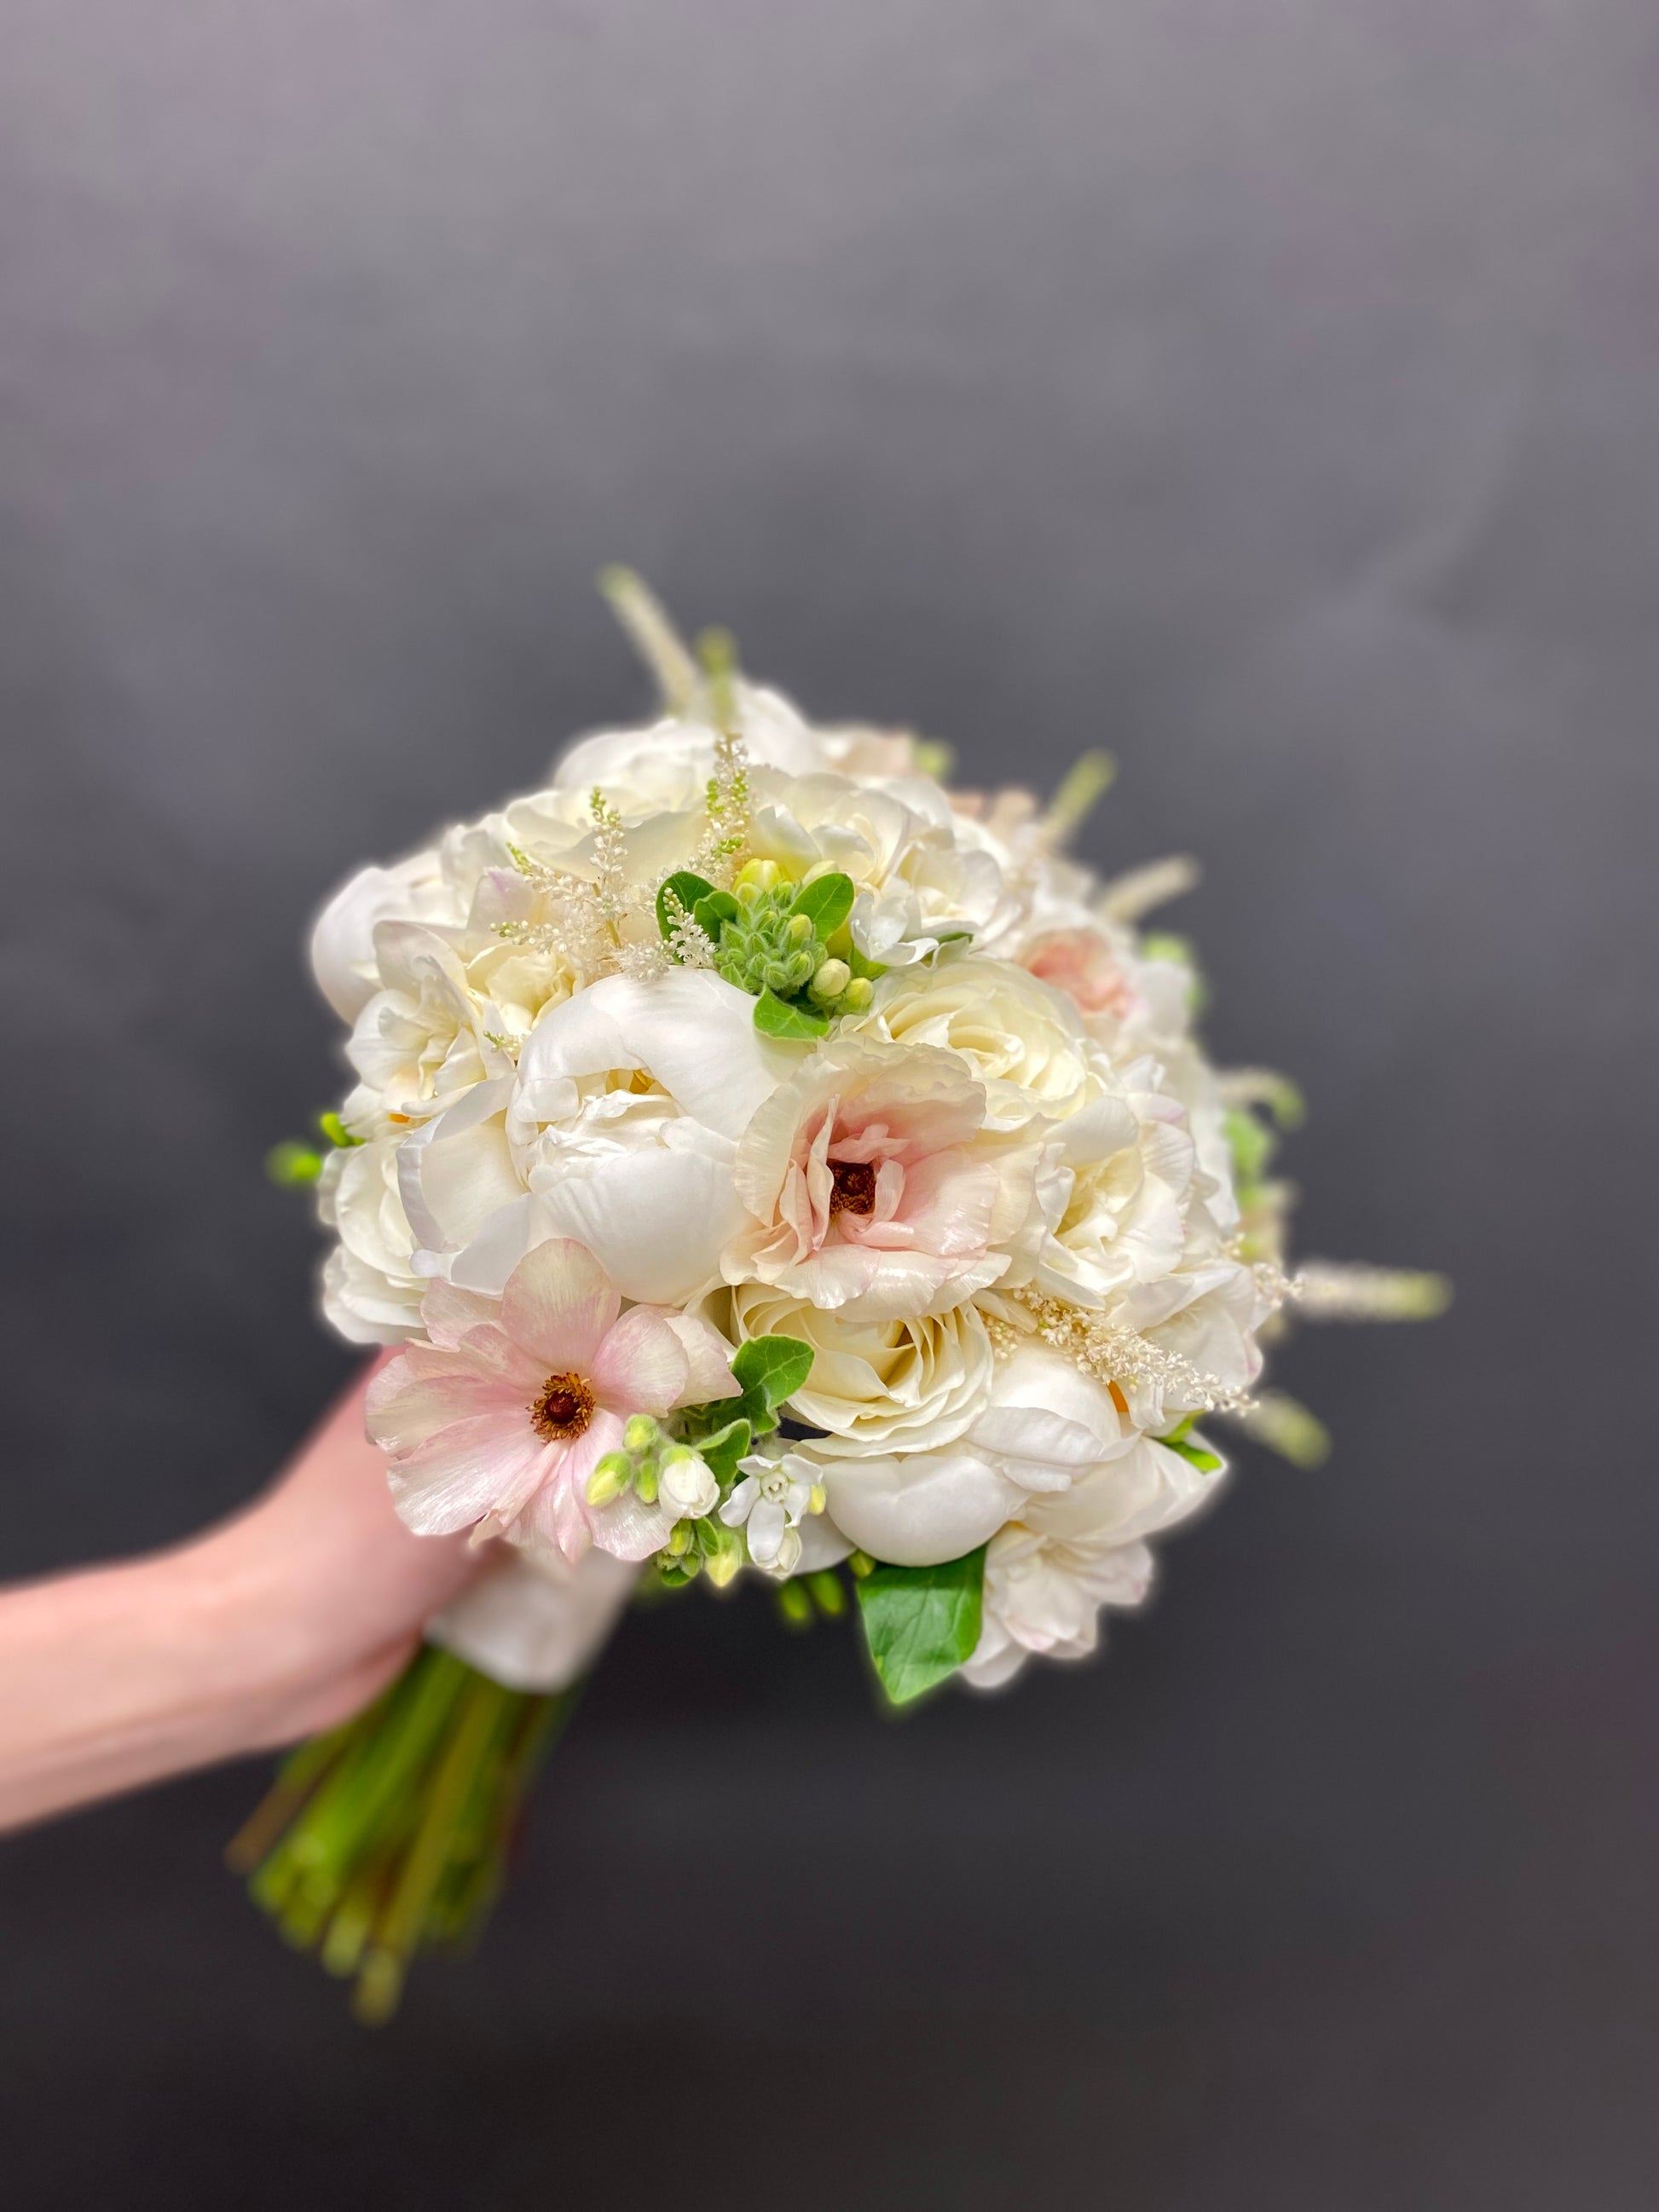 Bridal Bouquet with butterfly ranunculus and peonies